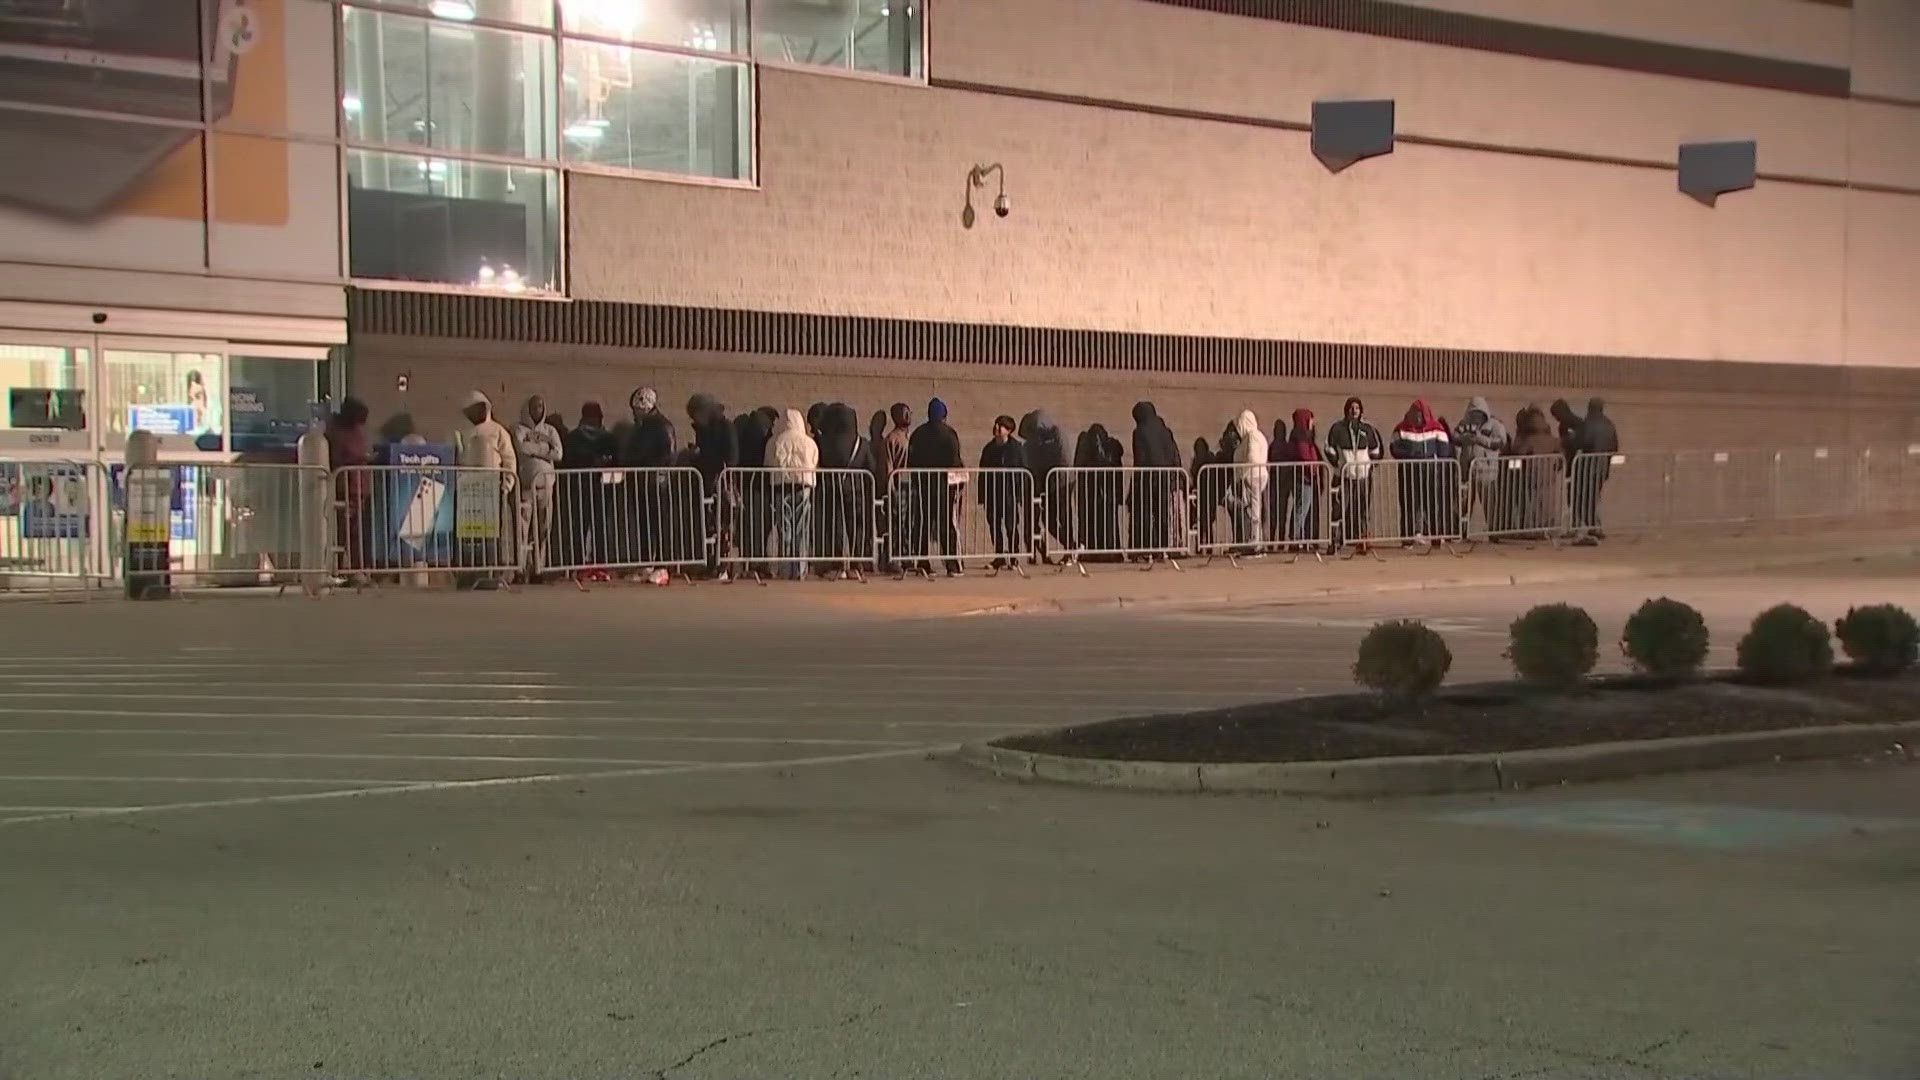 One of the stores opening early this year was Best Buy, opening it's doors at 6 a.m.